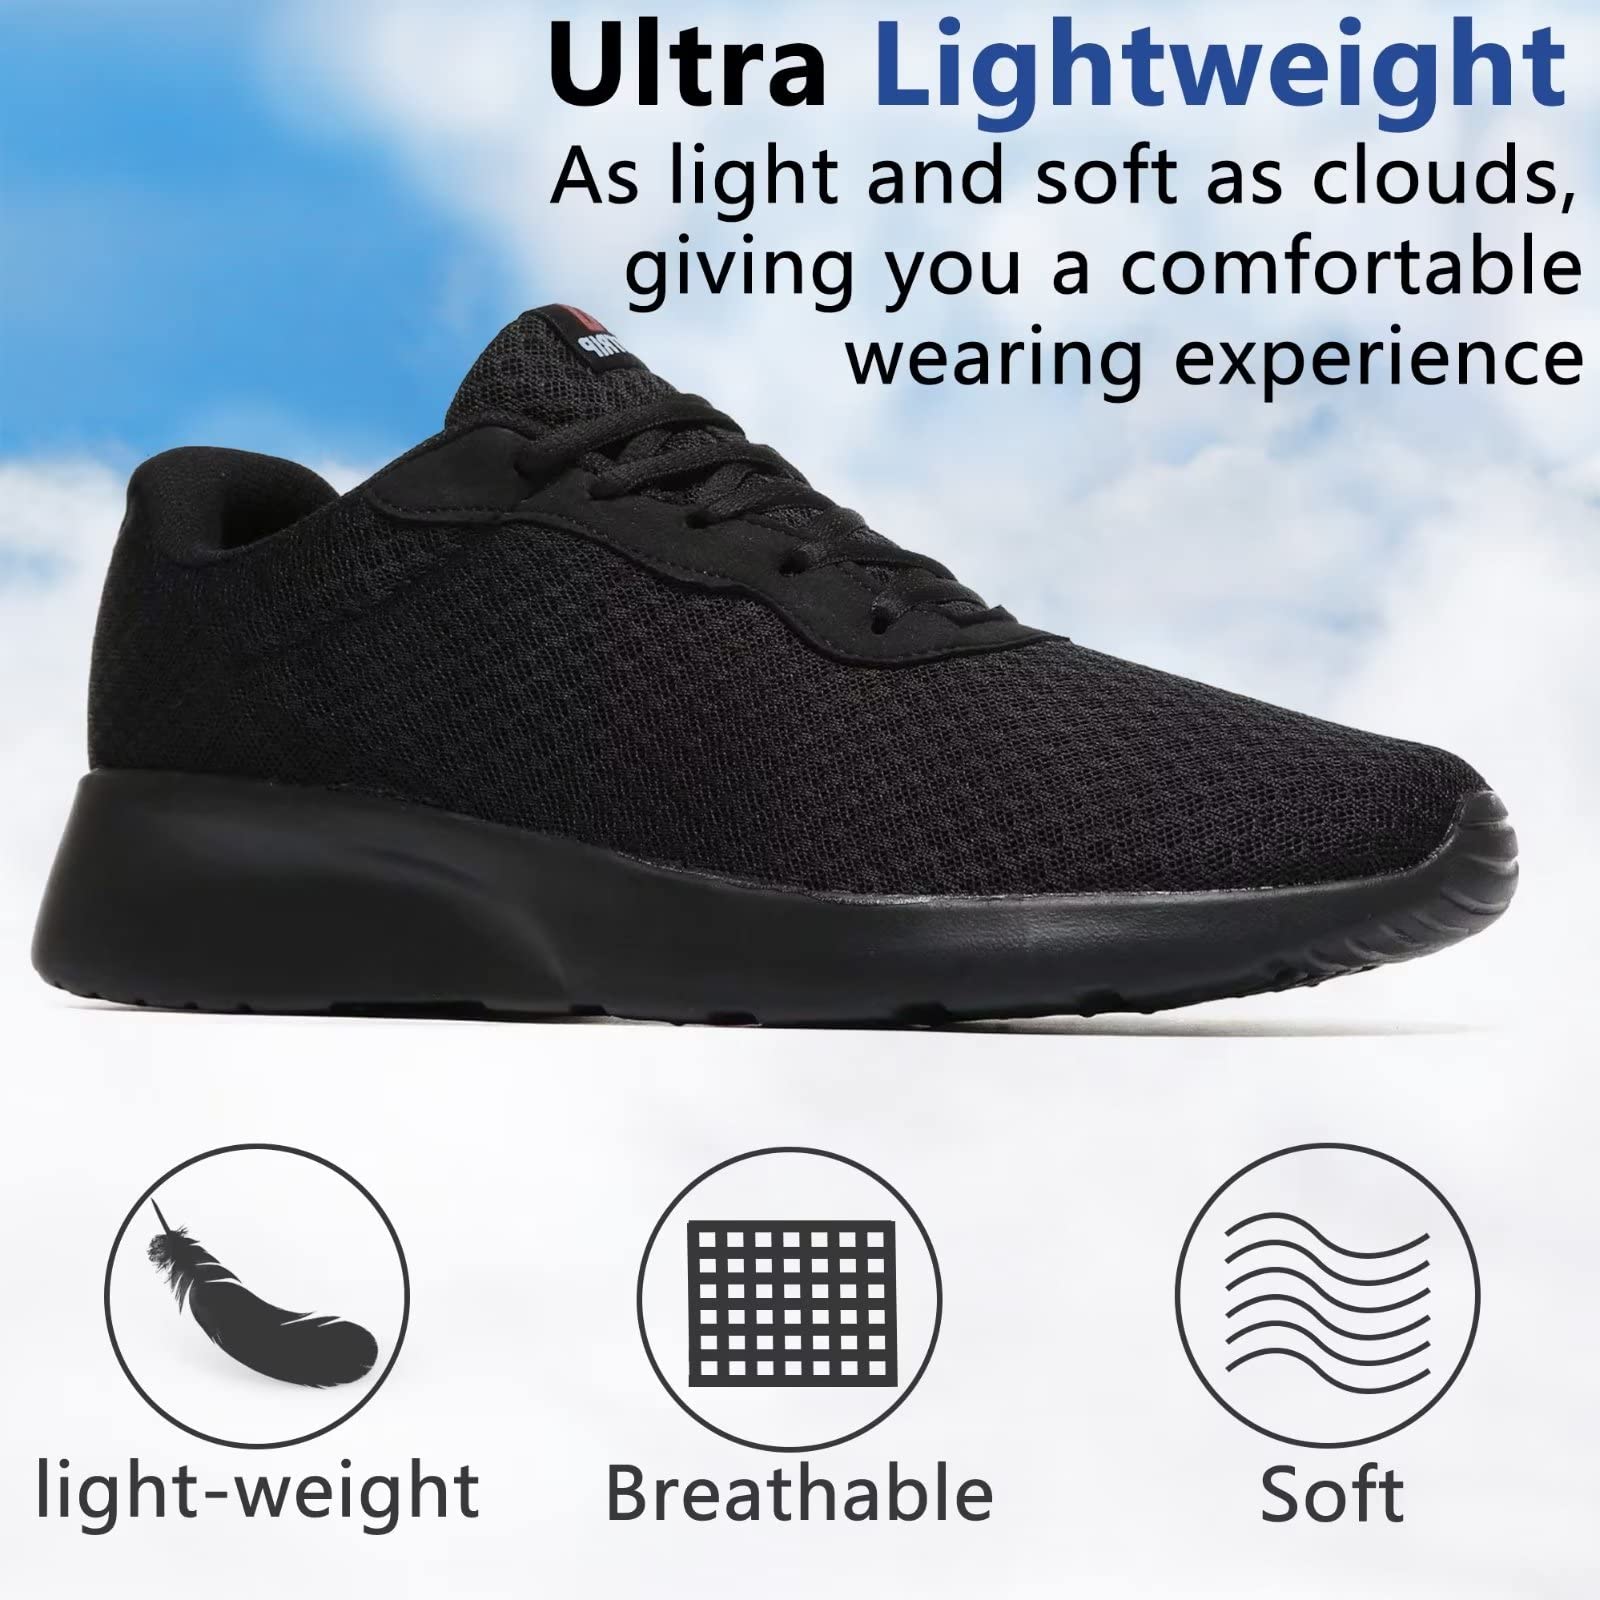 MAIITRIP Mens Walking Shoes,Ultra Lightweight Breathable Tennis Running Shoes Mesh Non-Slip Casual Comfortable Fashion Sneakers Work Gym Workout Athletic Sport Cuhioning Trainers Black Size 9.5